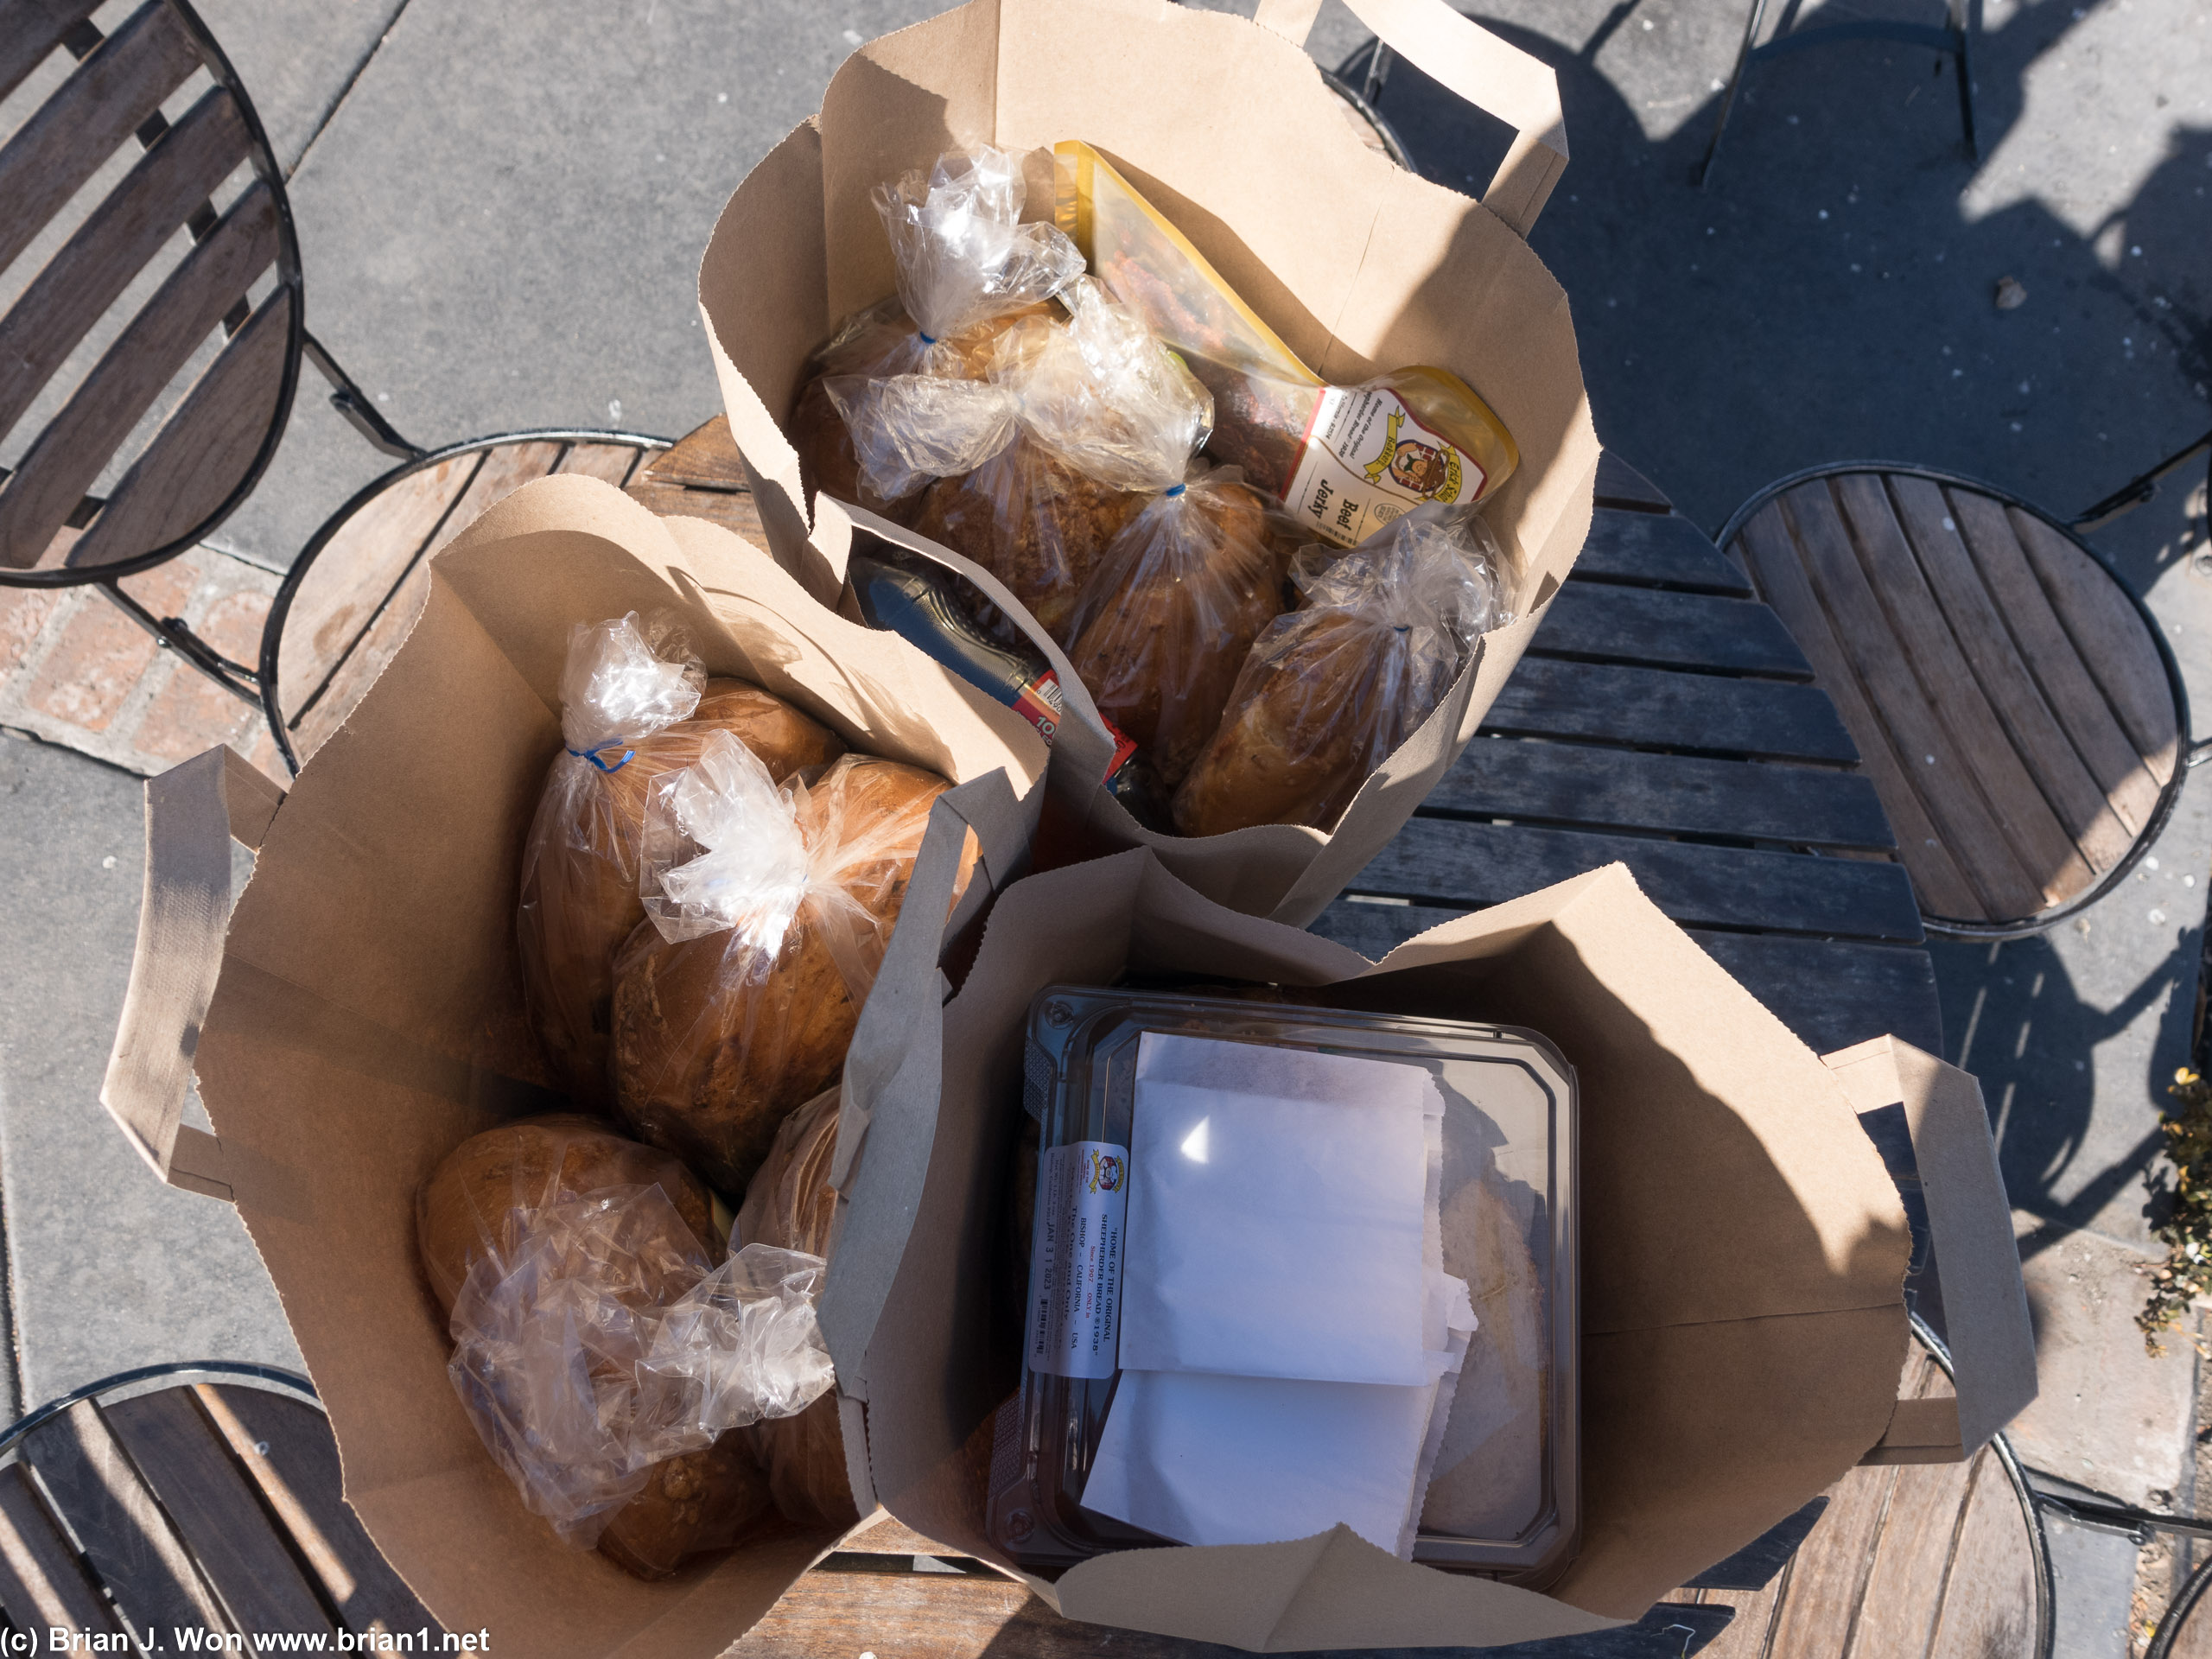 $150 worth of bread, plus one sandwich and a beef jerky.